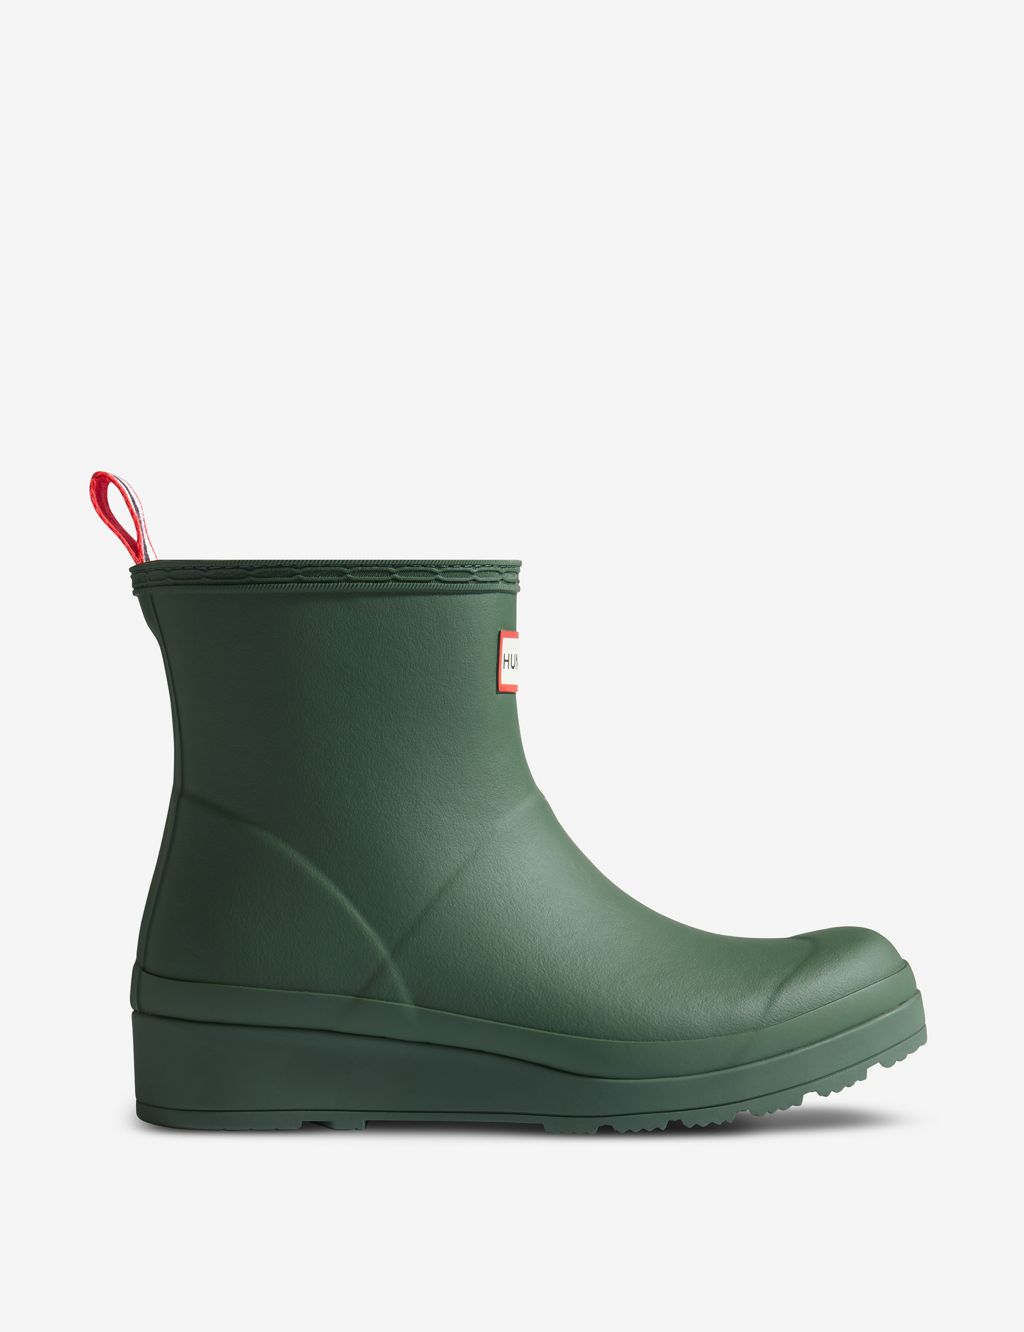 Short Insulated Wellies image 1